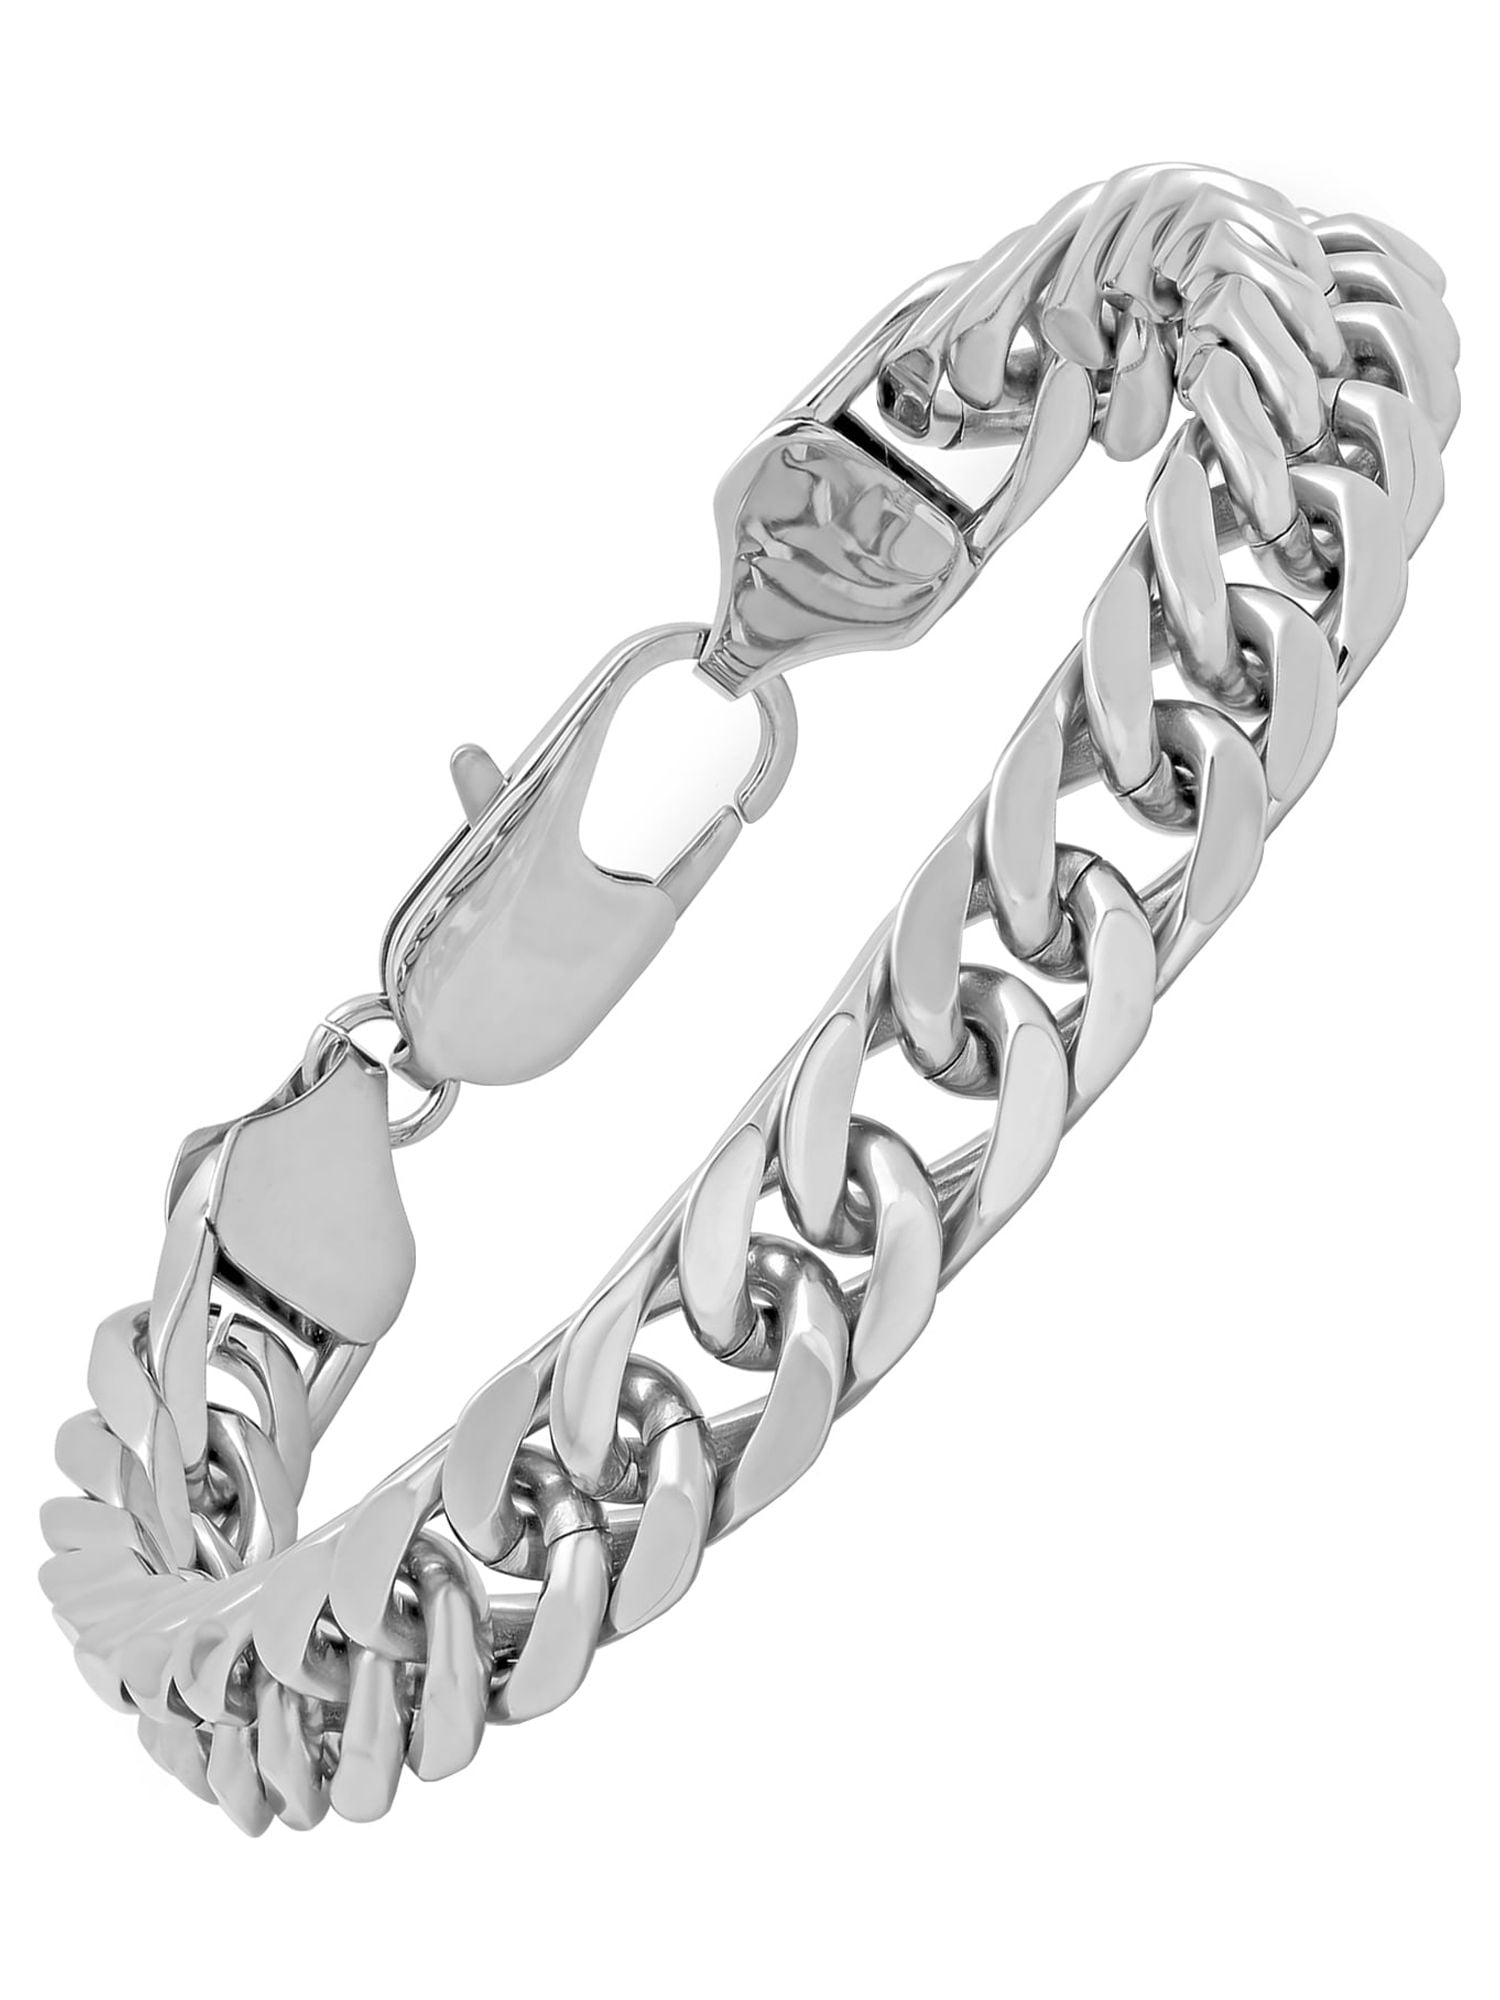 Mens Silver-Tone Stainless Steel Curb Link Bracelet